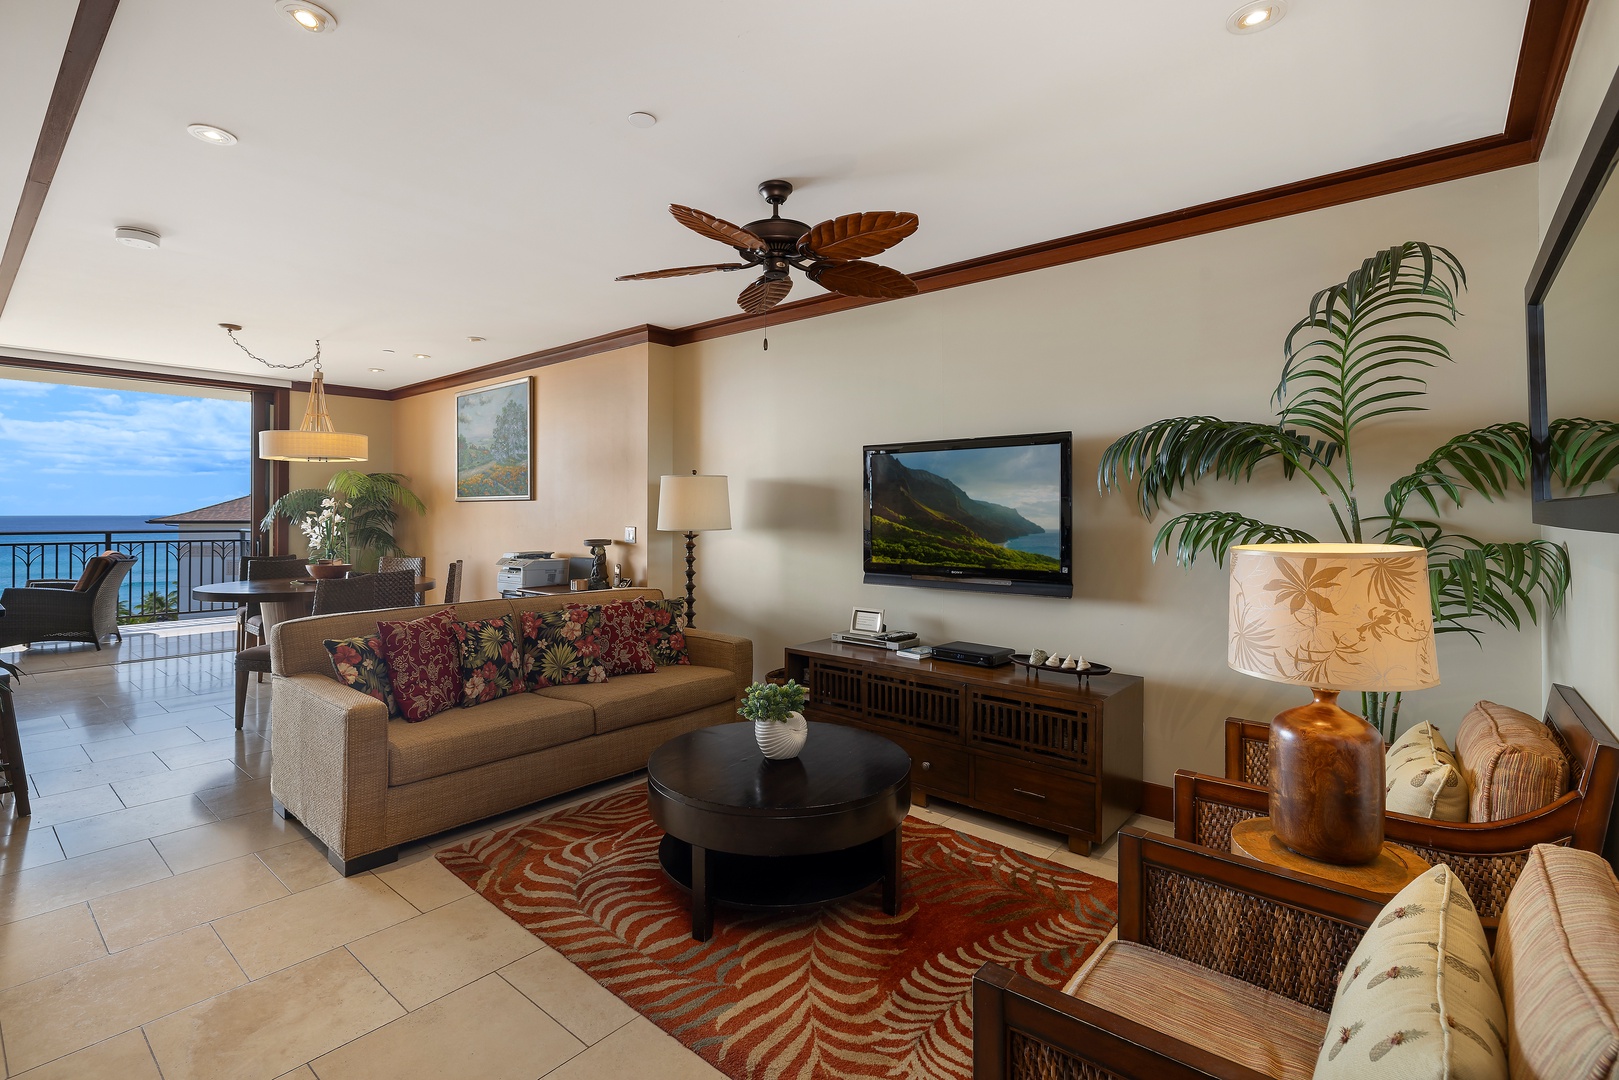 Kapolei Vacation Rentals, Ko Olina Beach Villas O1004 - Spacious living room with TV and vibrant decor, perfect for gathering at the end of the day.